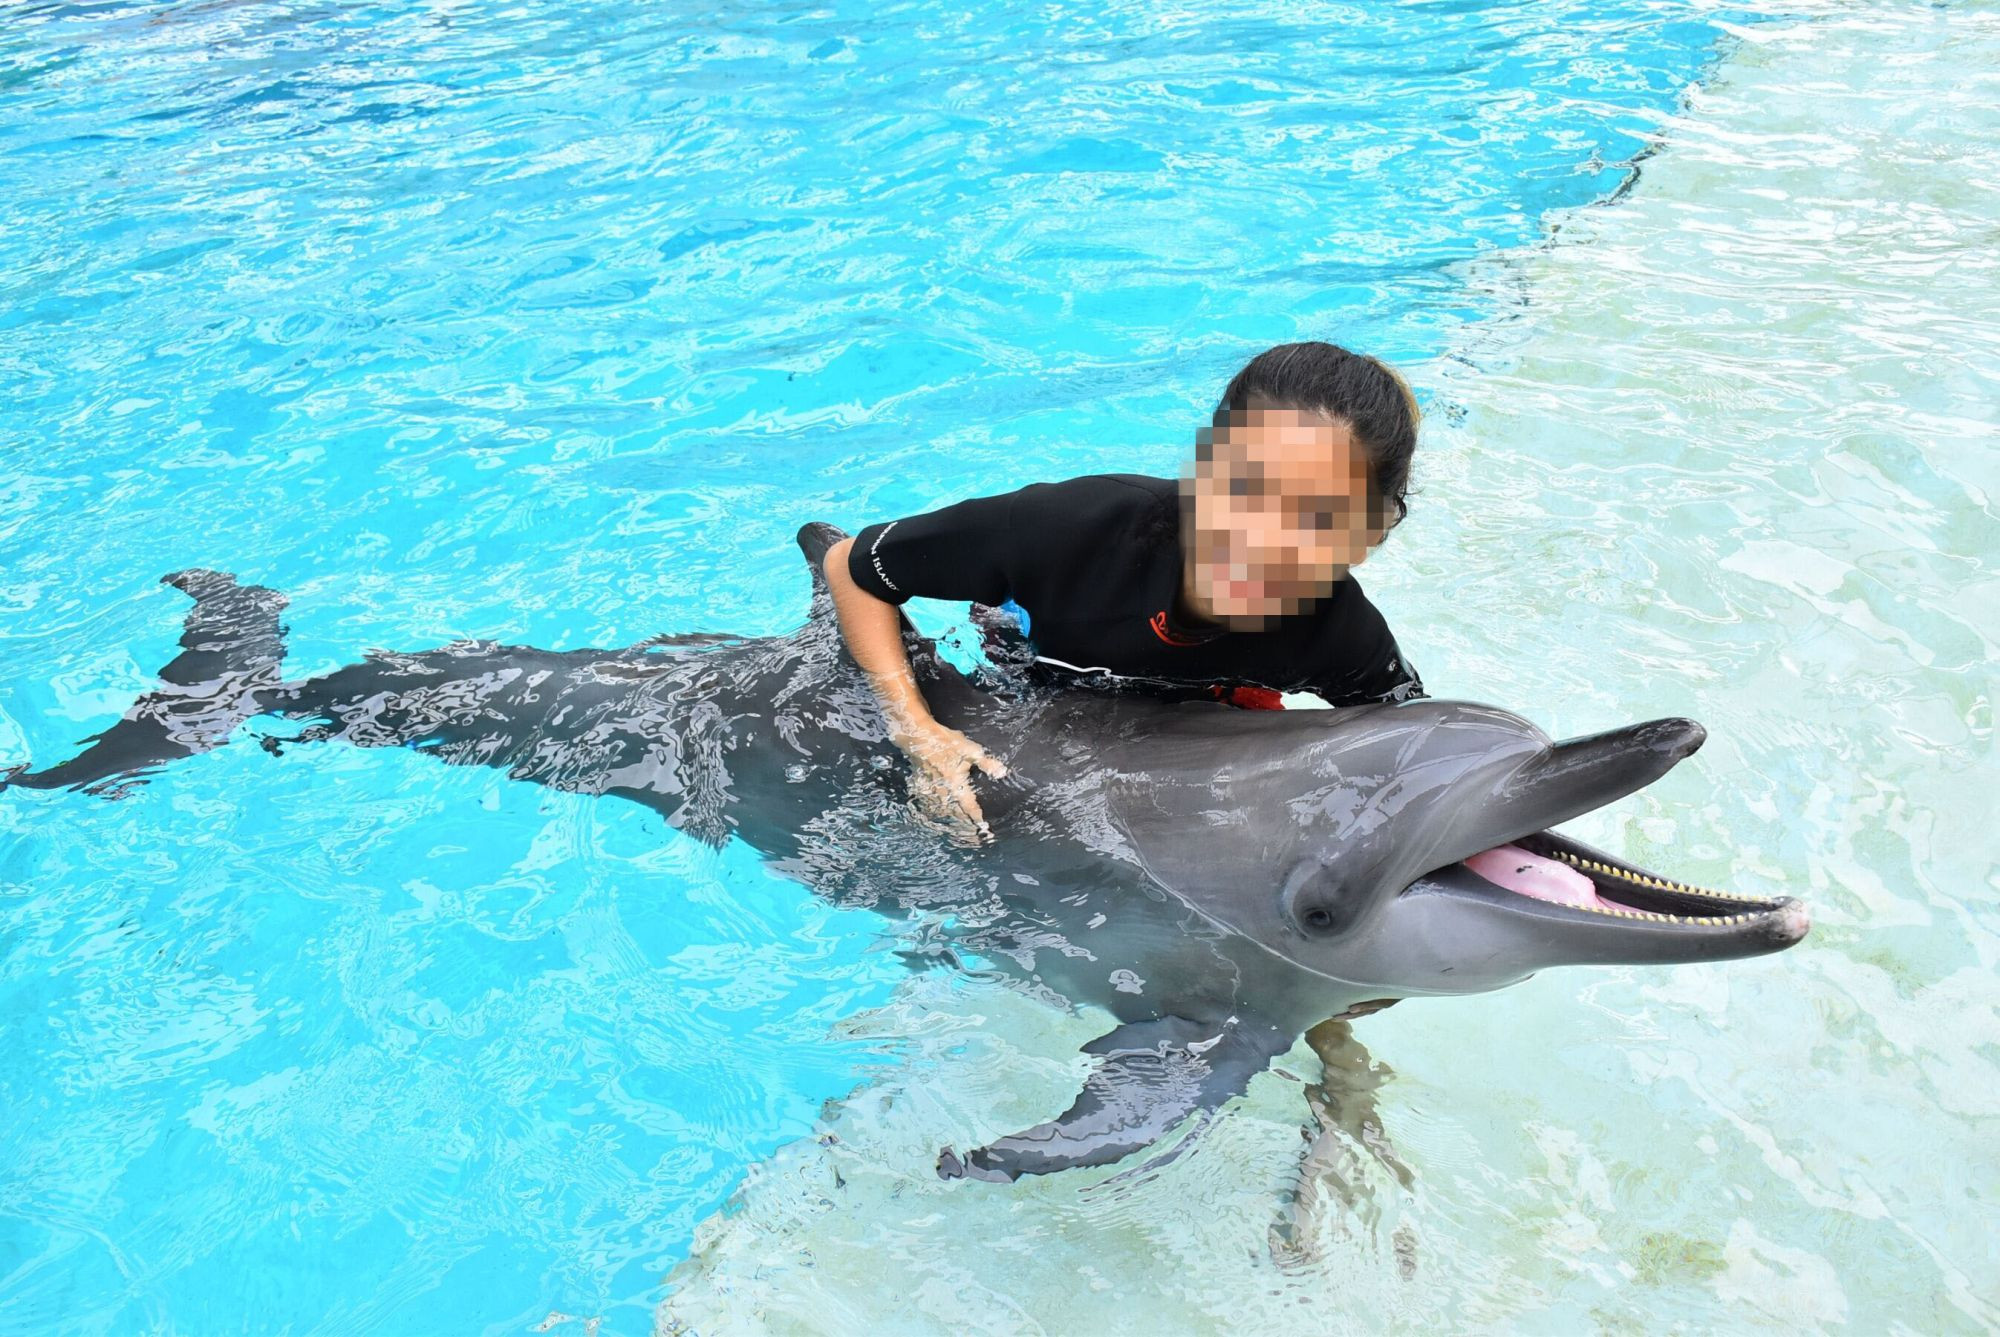 Dolphin in captivity at an entertainment venue